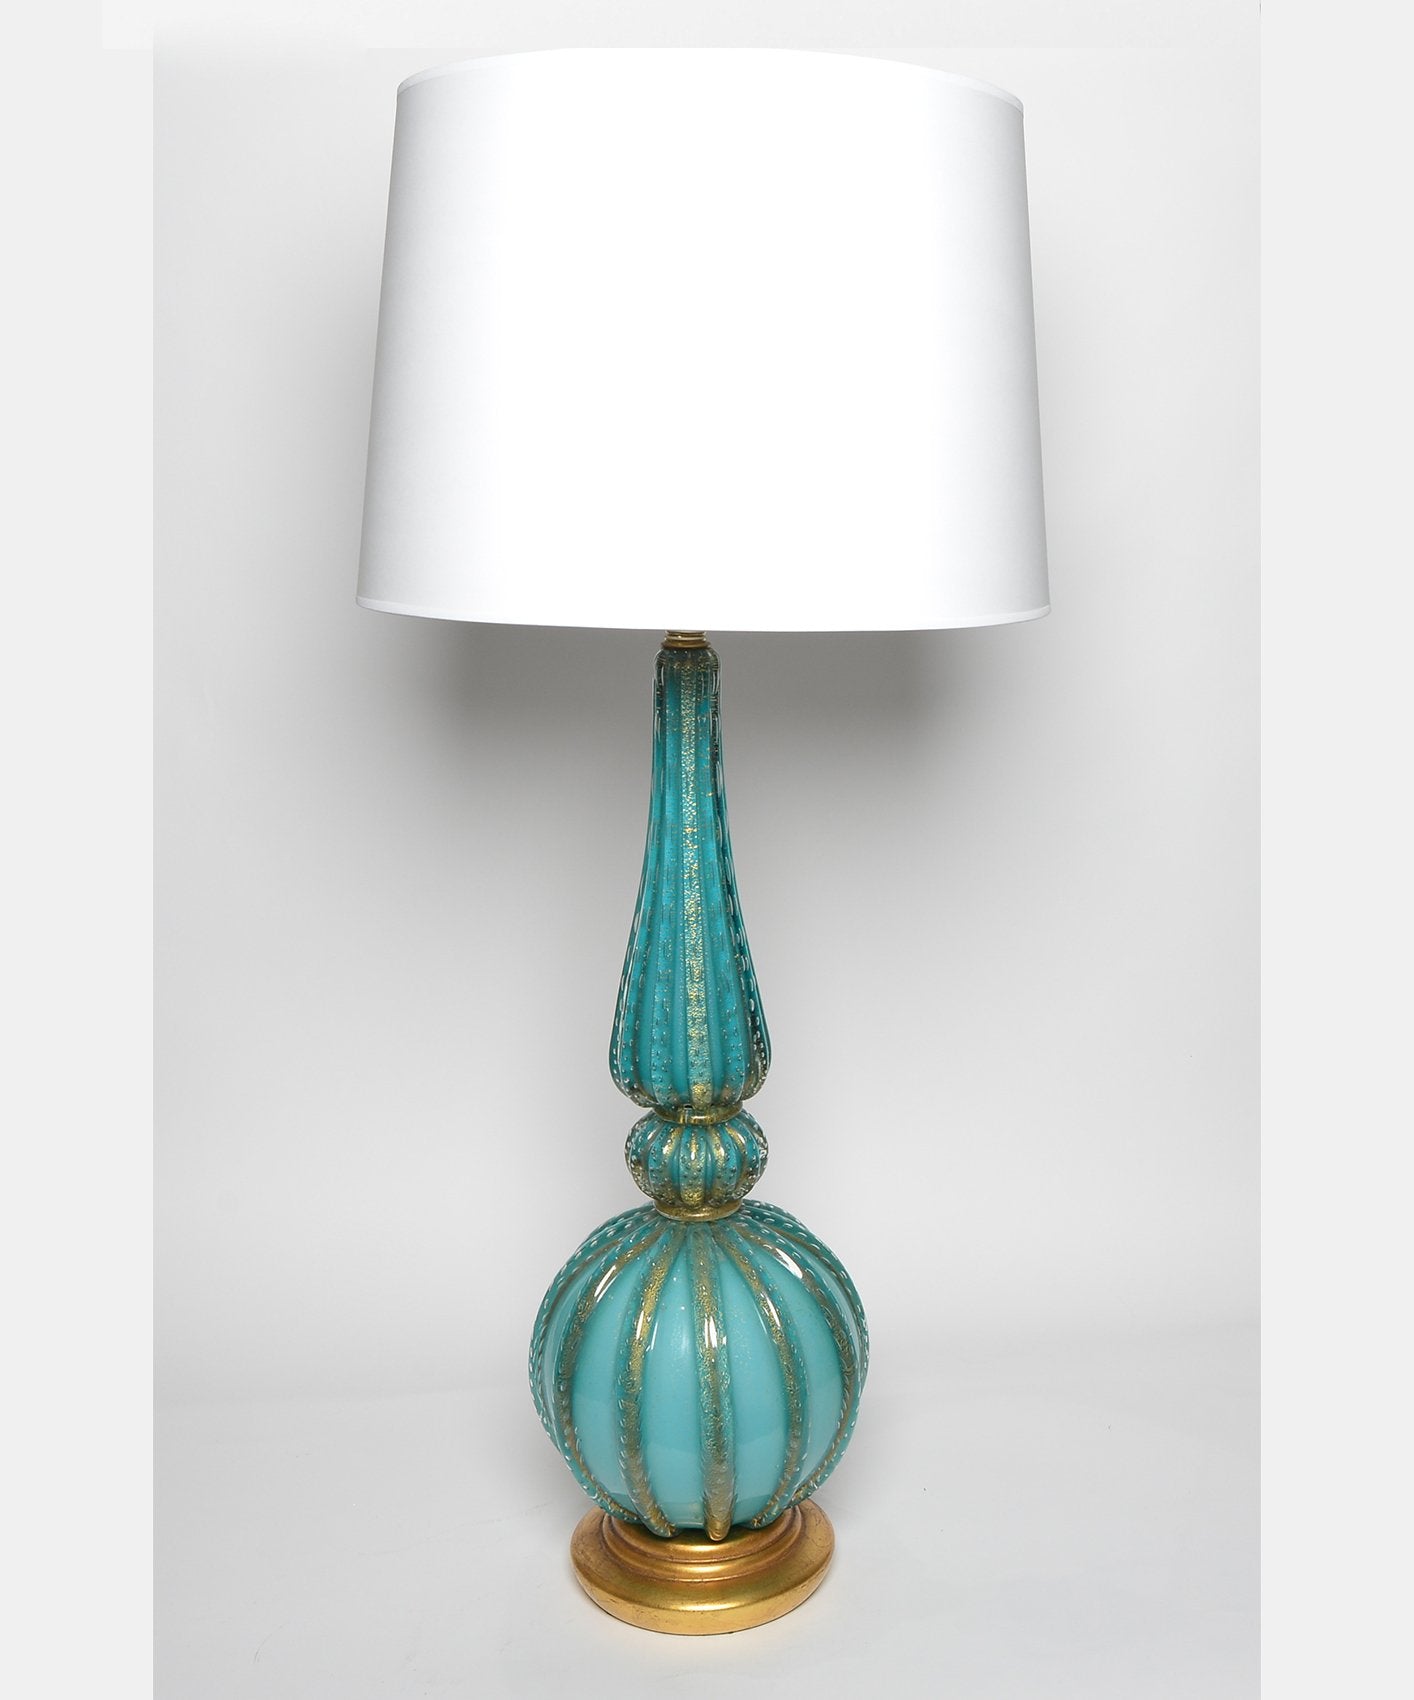 Teal and Gold Murano Glass Table Lamp